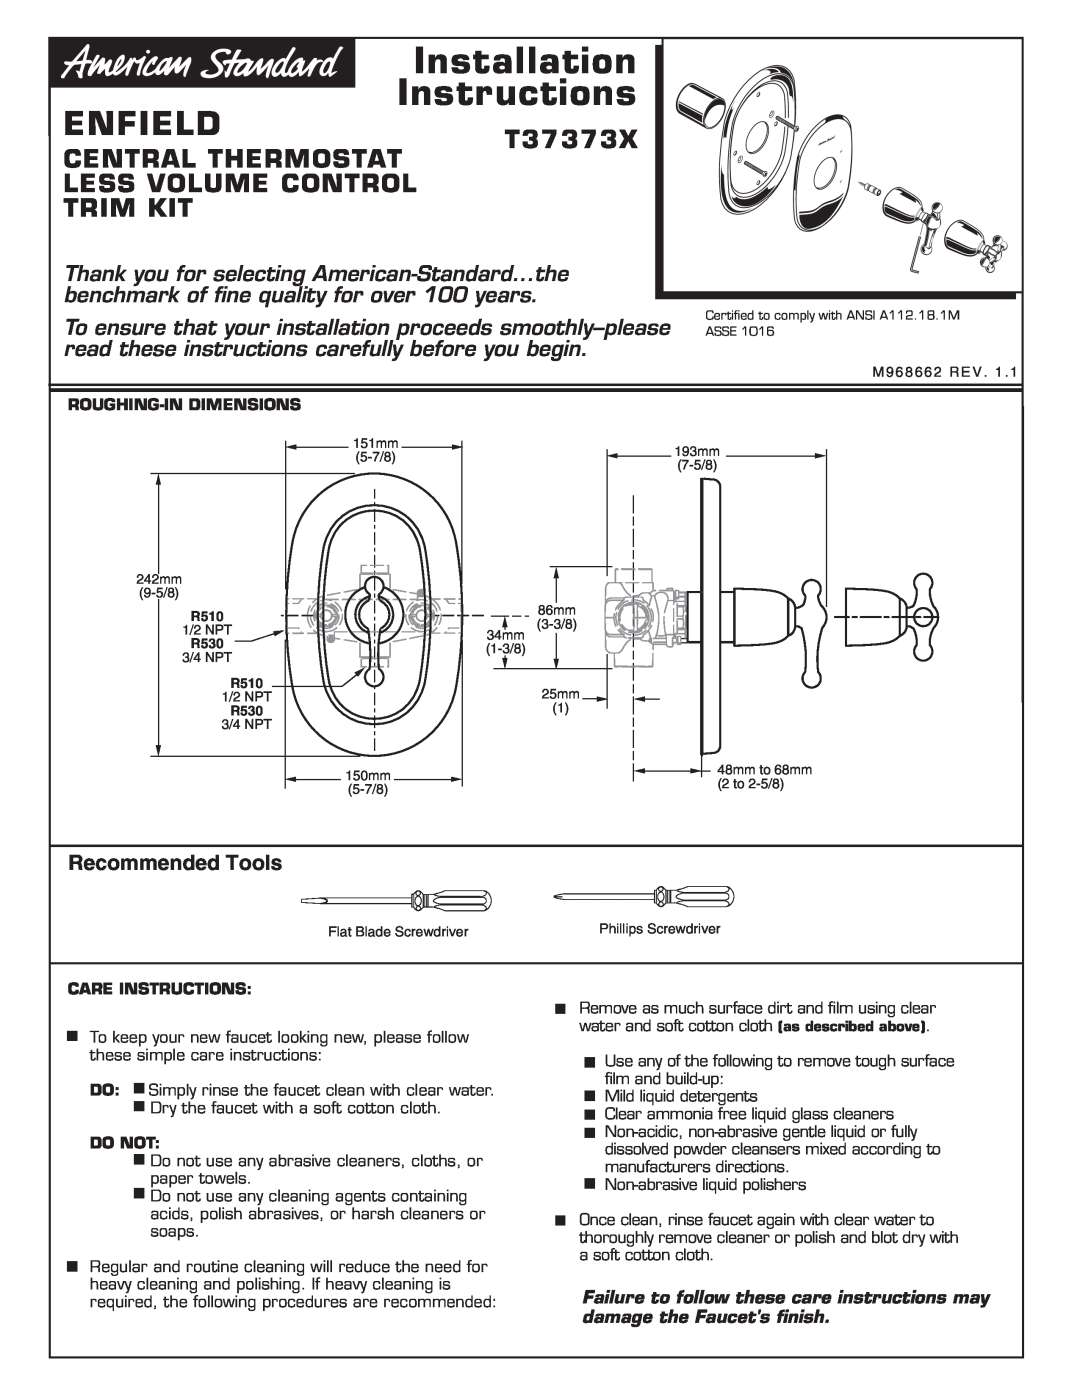 American Standard installation instructions ENFIELDT37373X, Central Thermostat Less Volume Control Trim Kit 